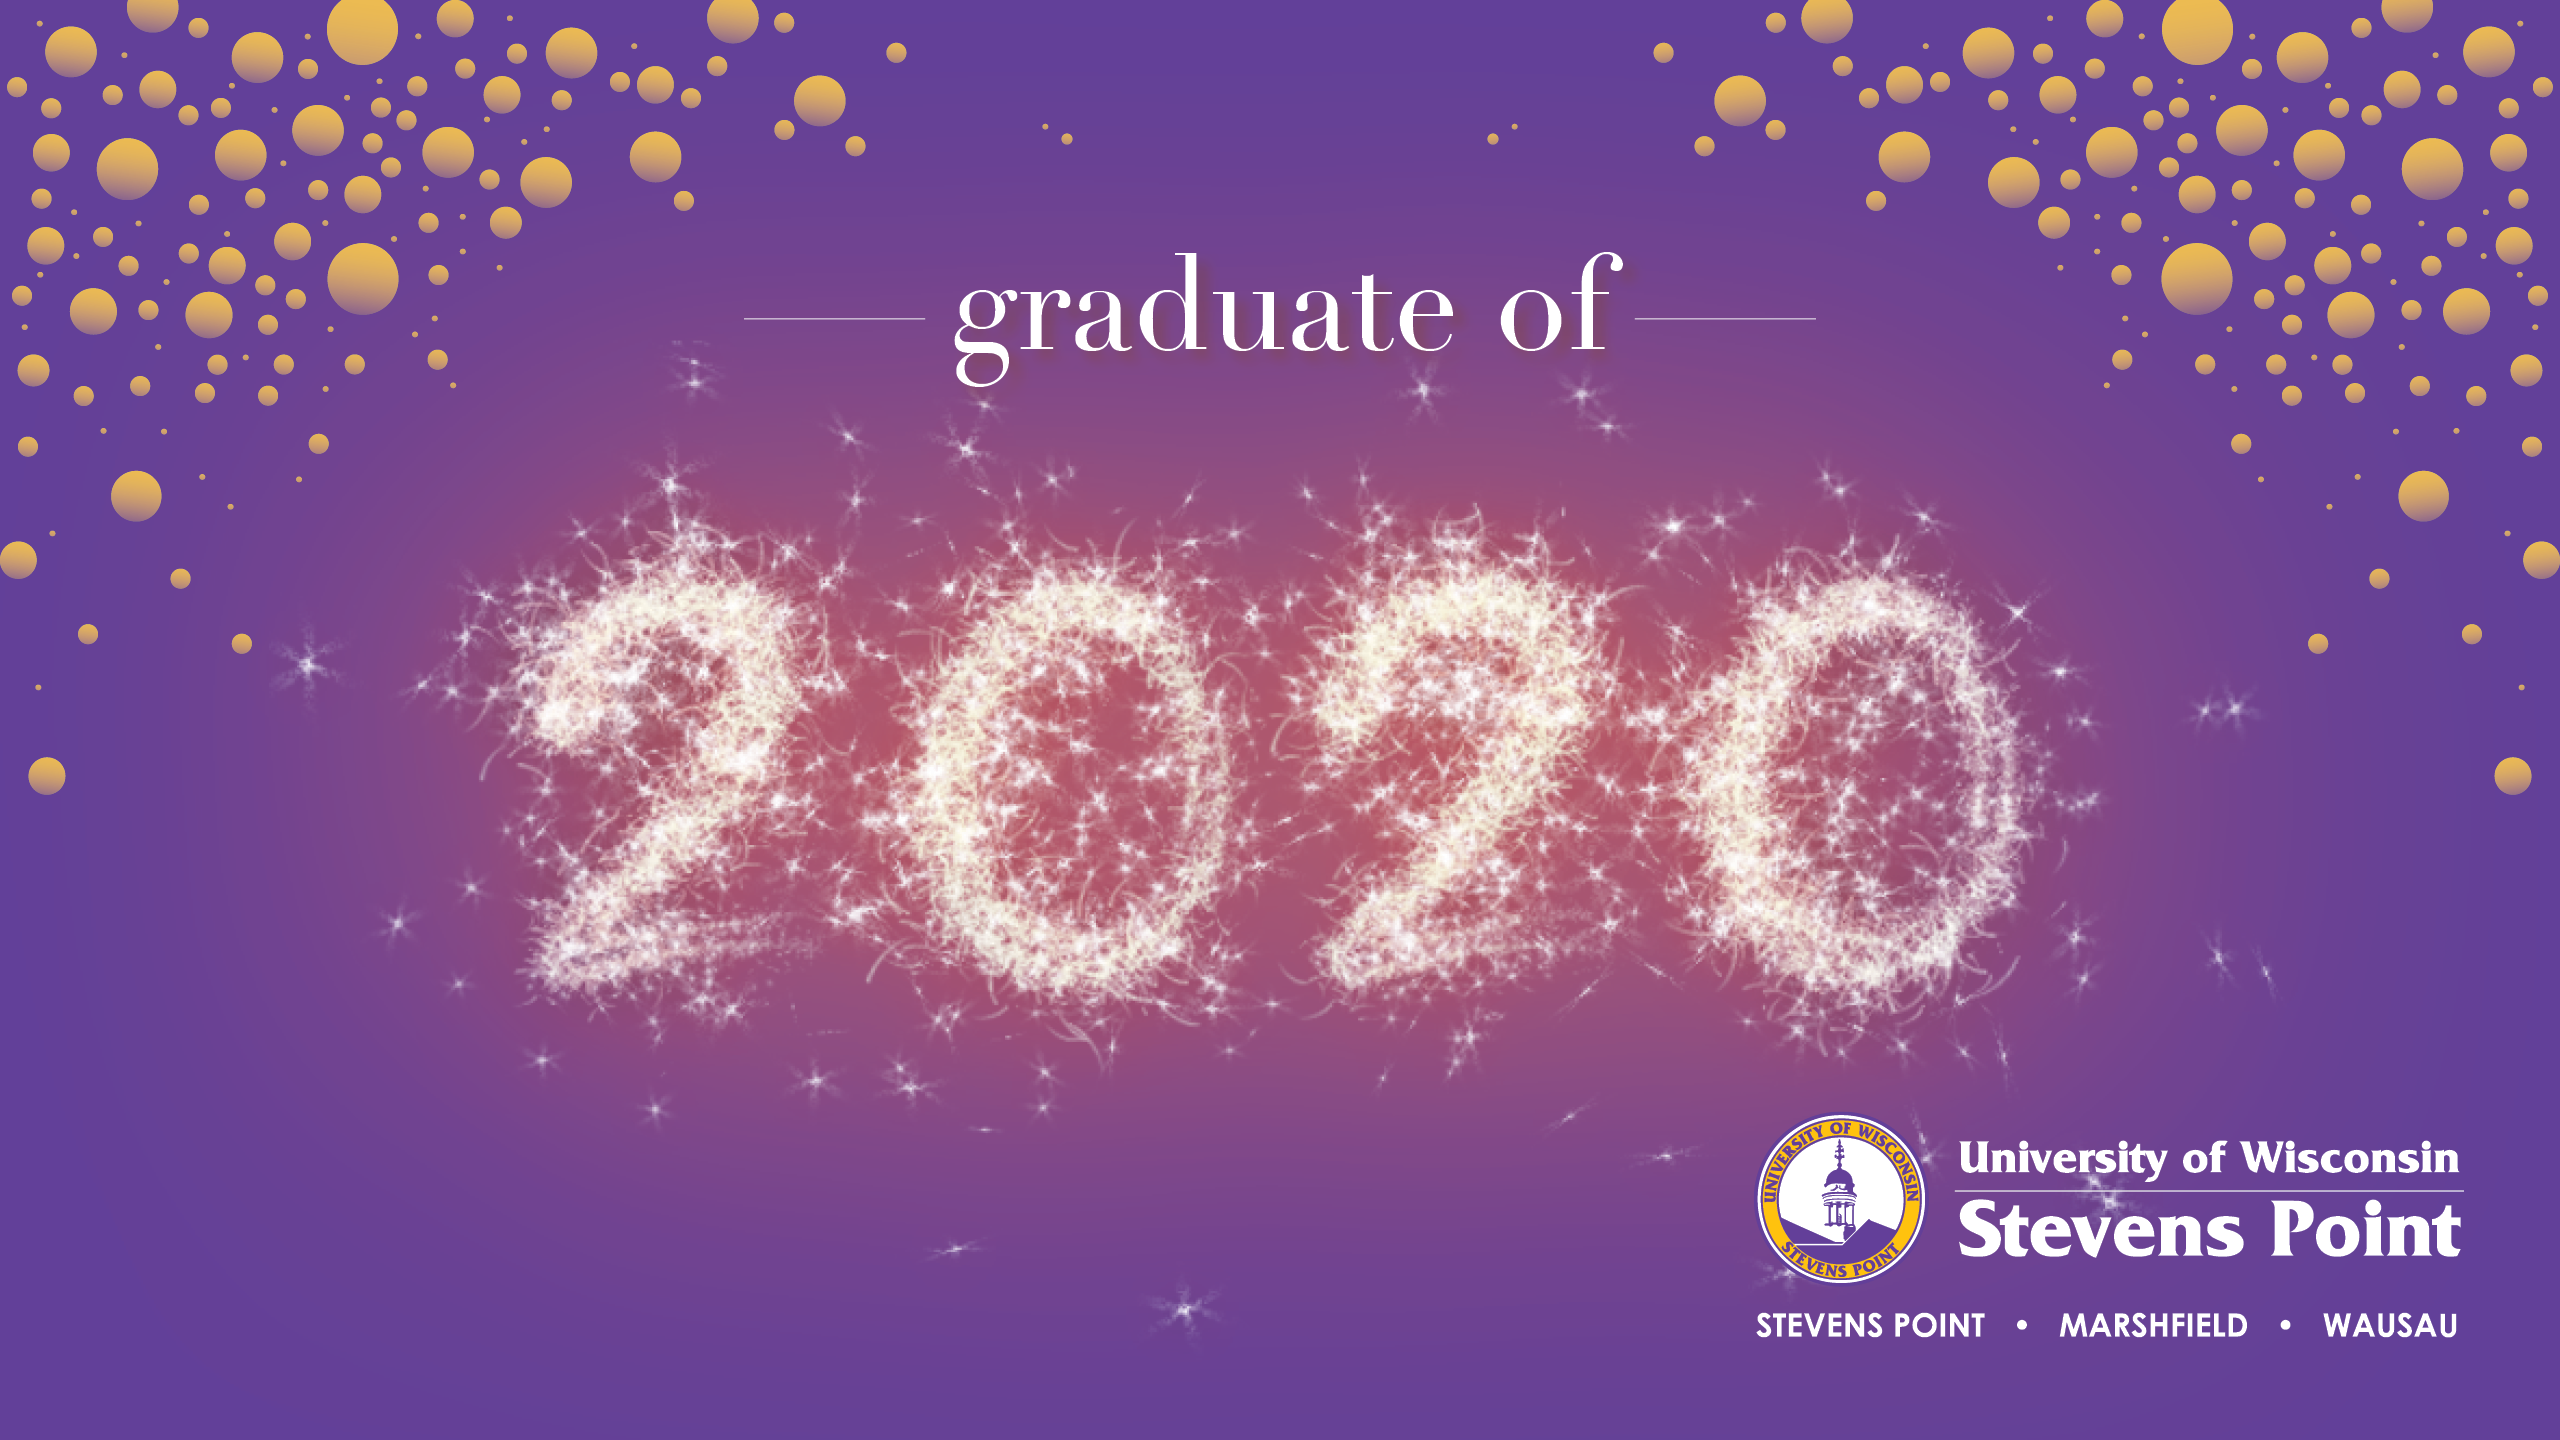 Commencement-Zoom-backgrounds-1920x10802.png